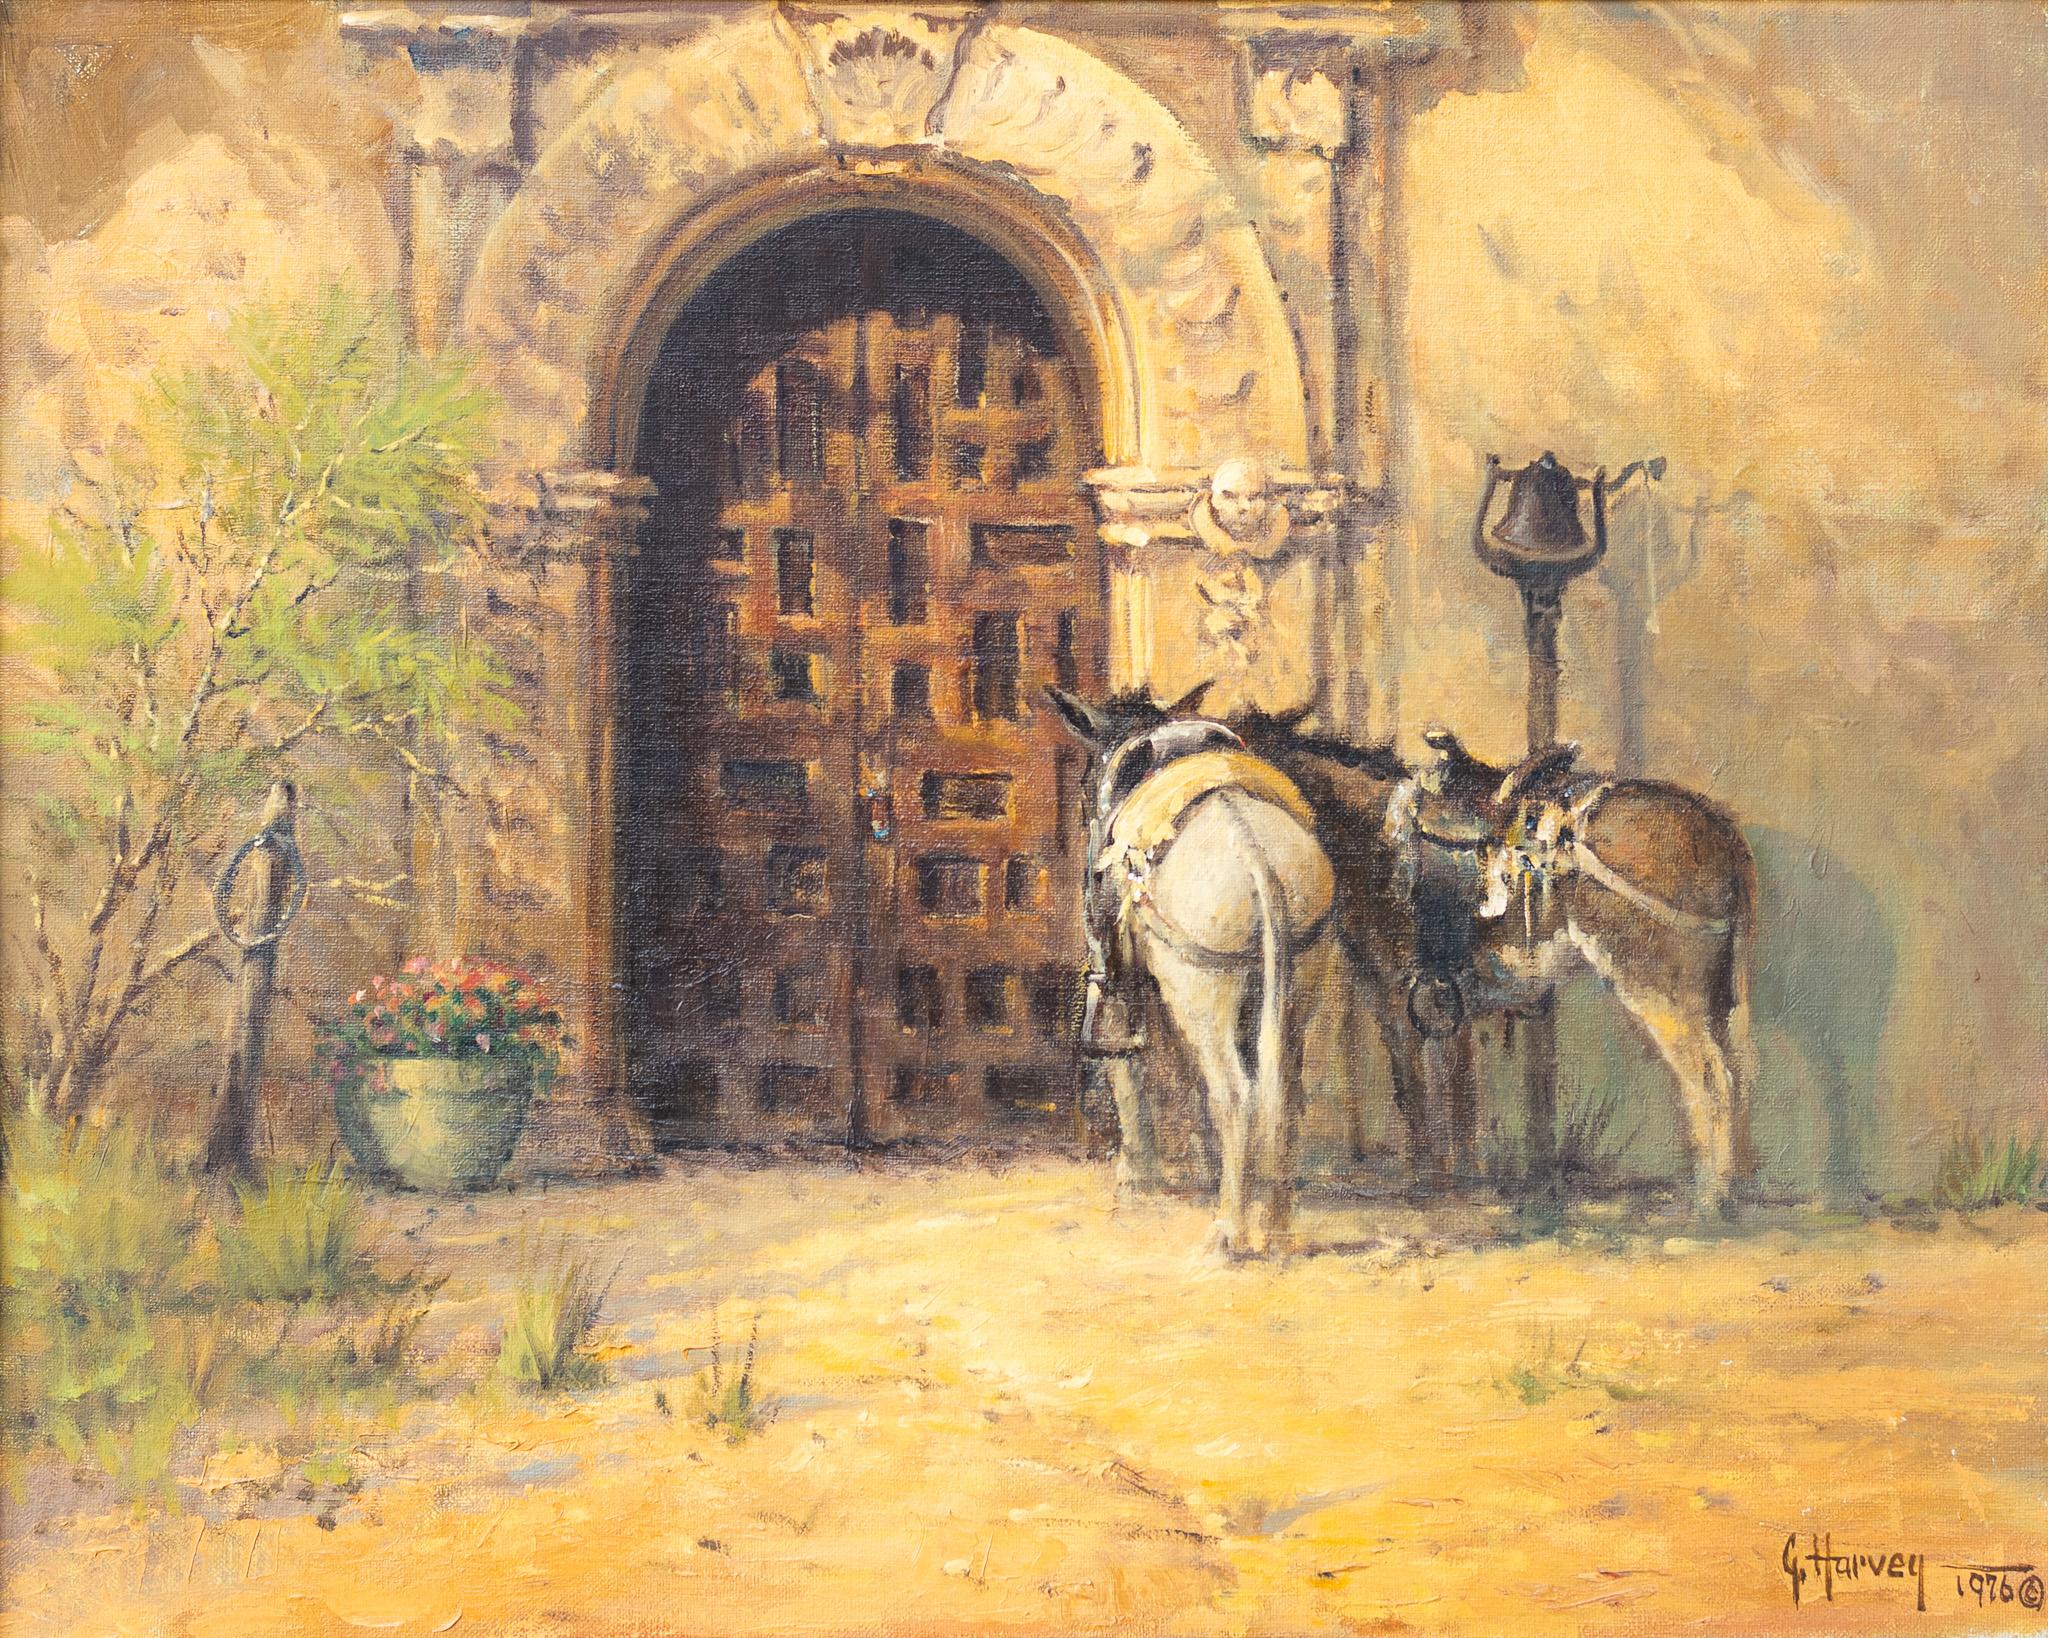 G. Harvey Landscape Painting - "Pasientes" Western Scene with Horses Donkeys Bell Door Flowers Signed Master